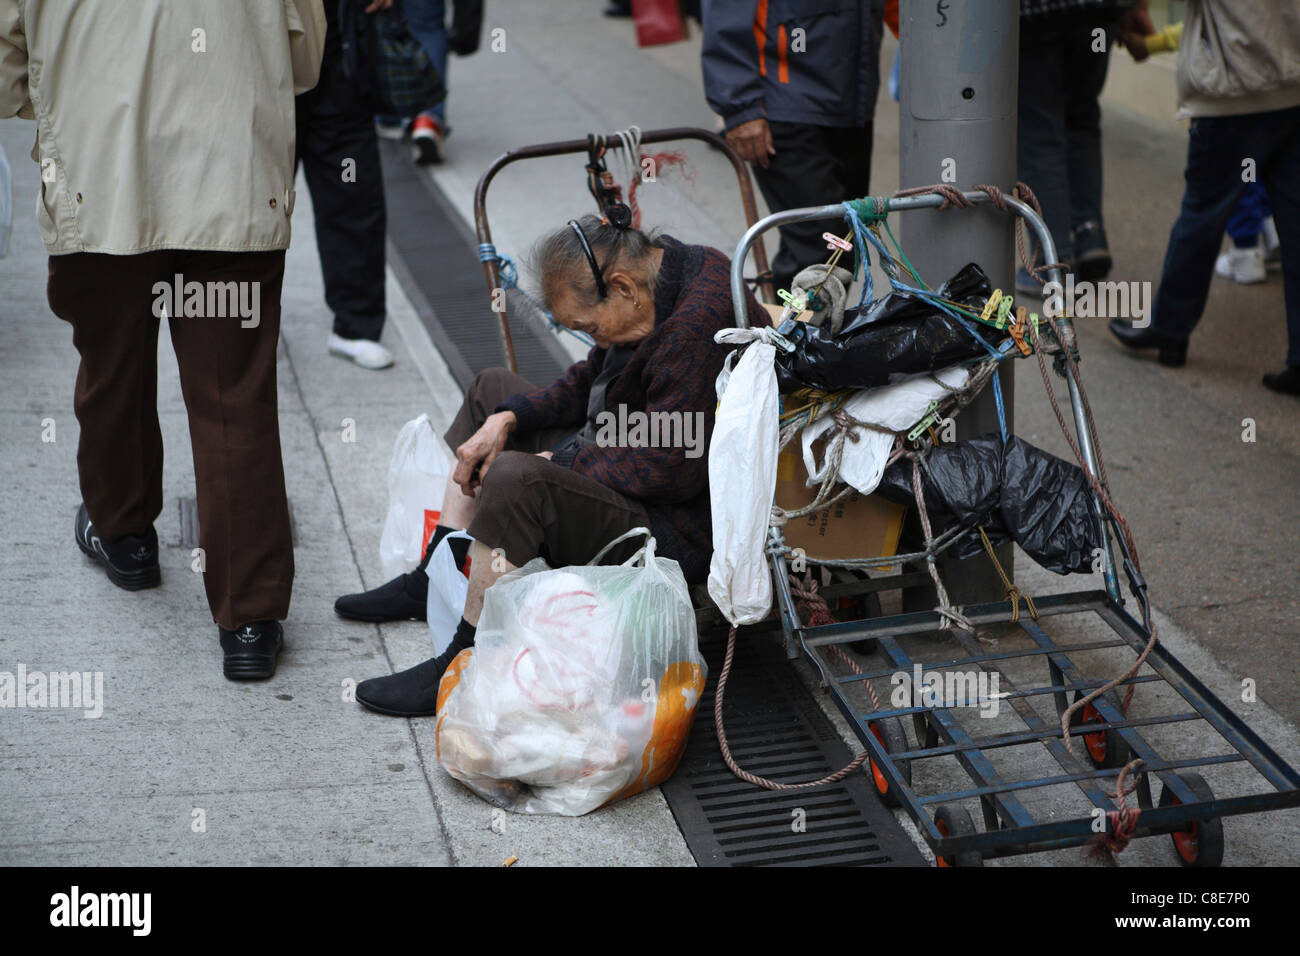 Destitute elderly woman alone on street in Kowloon, Hong Hong, China Stock Photo